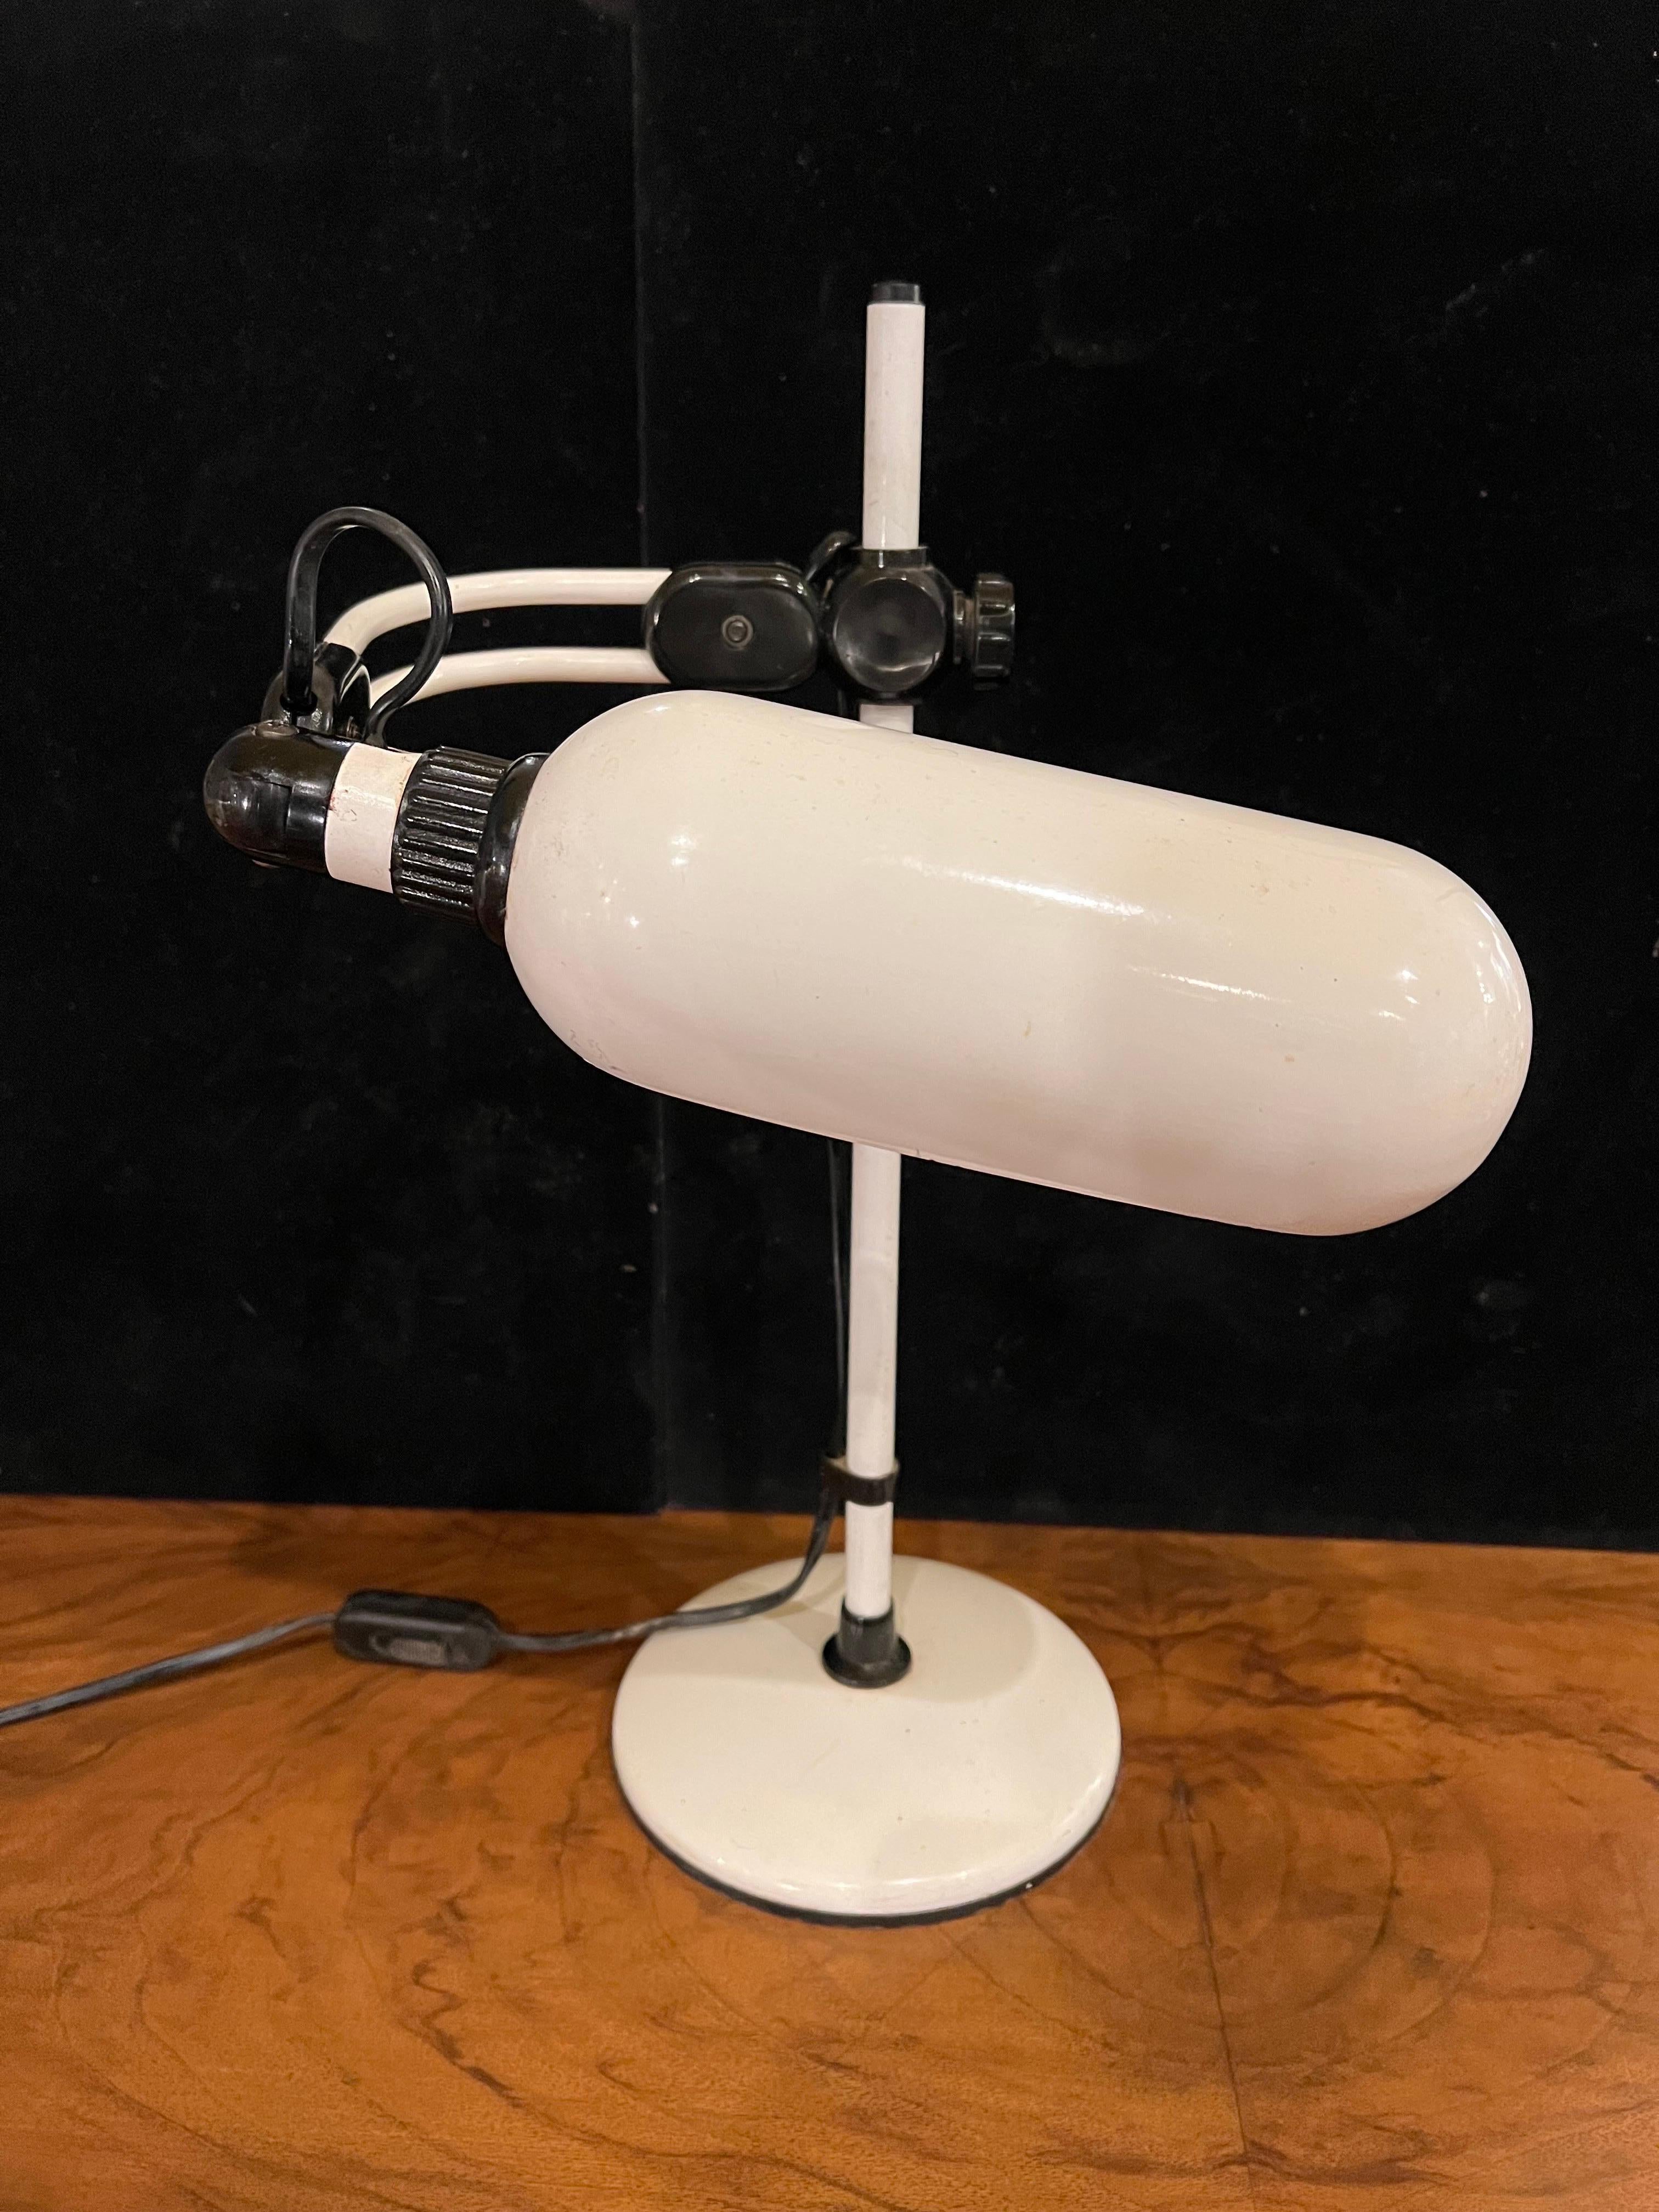 Rare postmodern Italian design, multidirectional table desk lamp enameled white metal finish with plastic fittings, circa 1980's in great condition in many different positions.